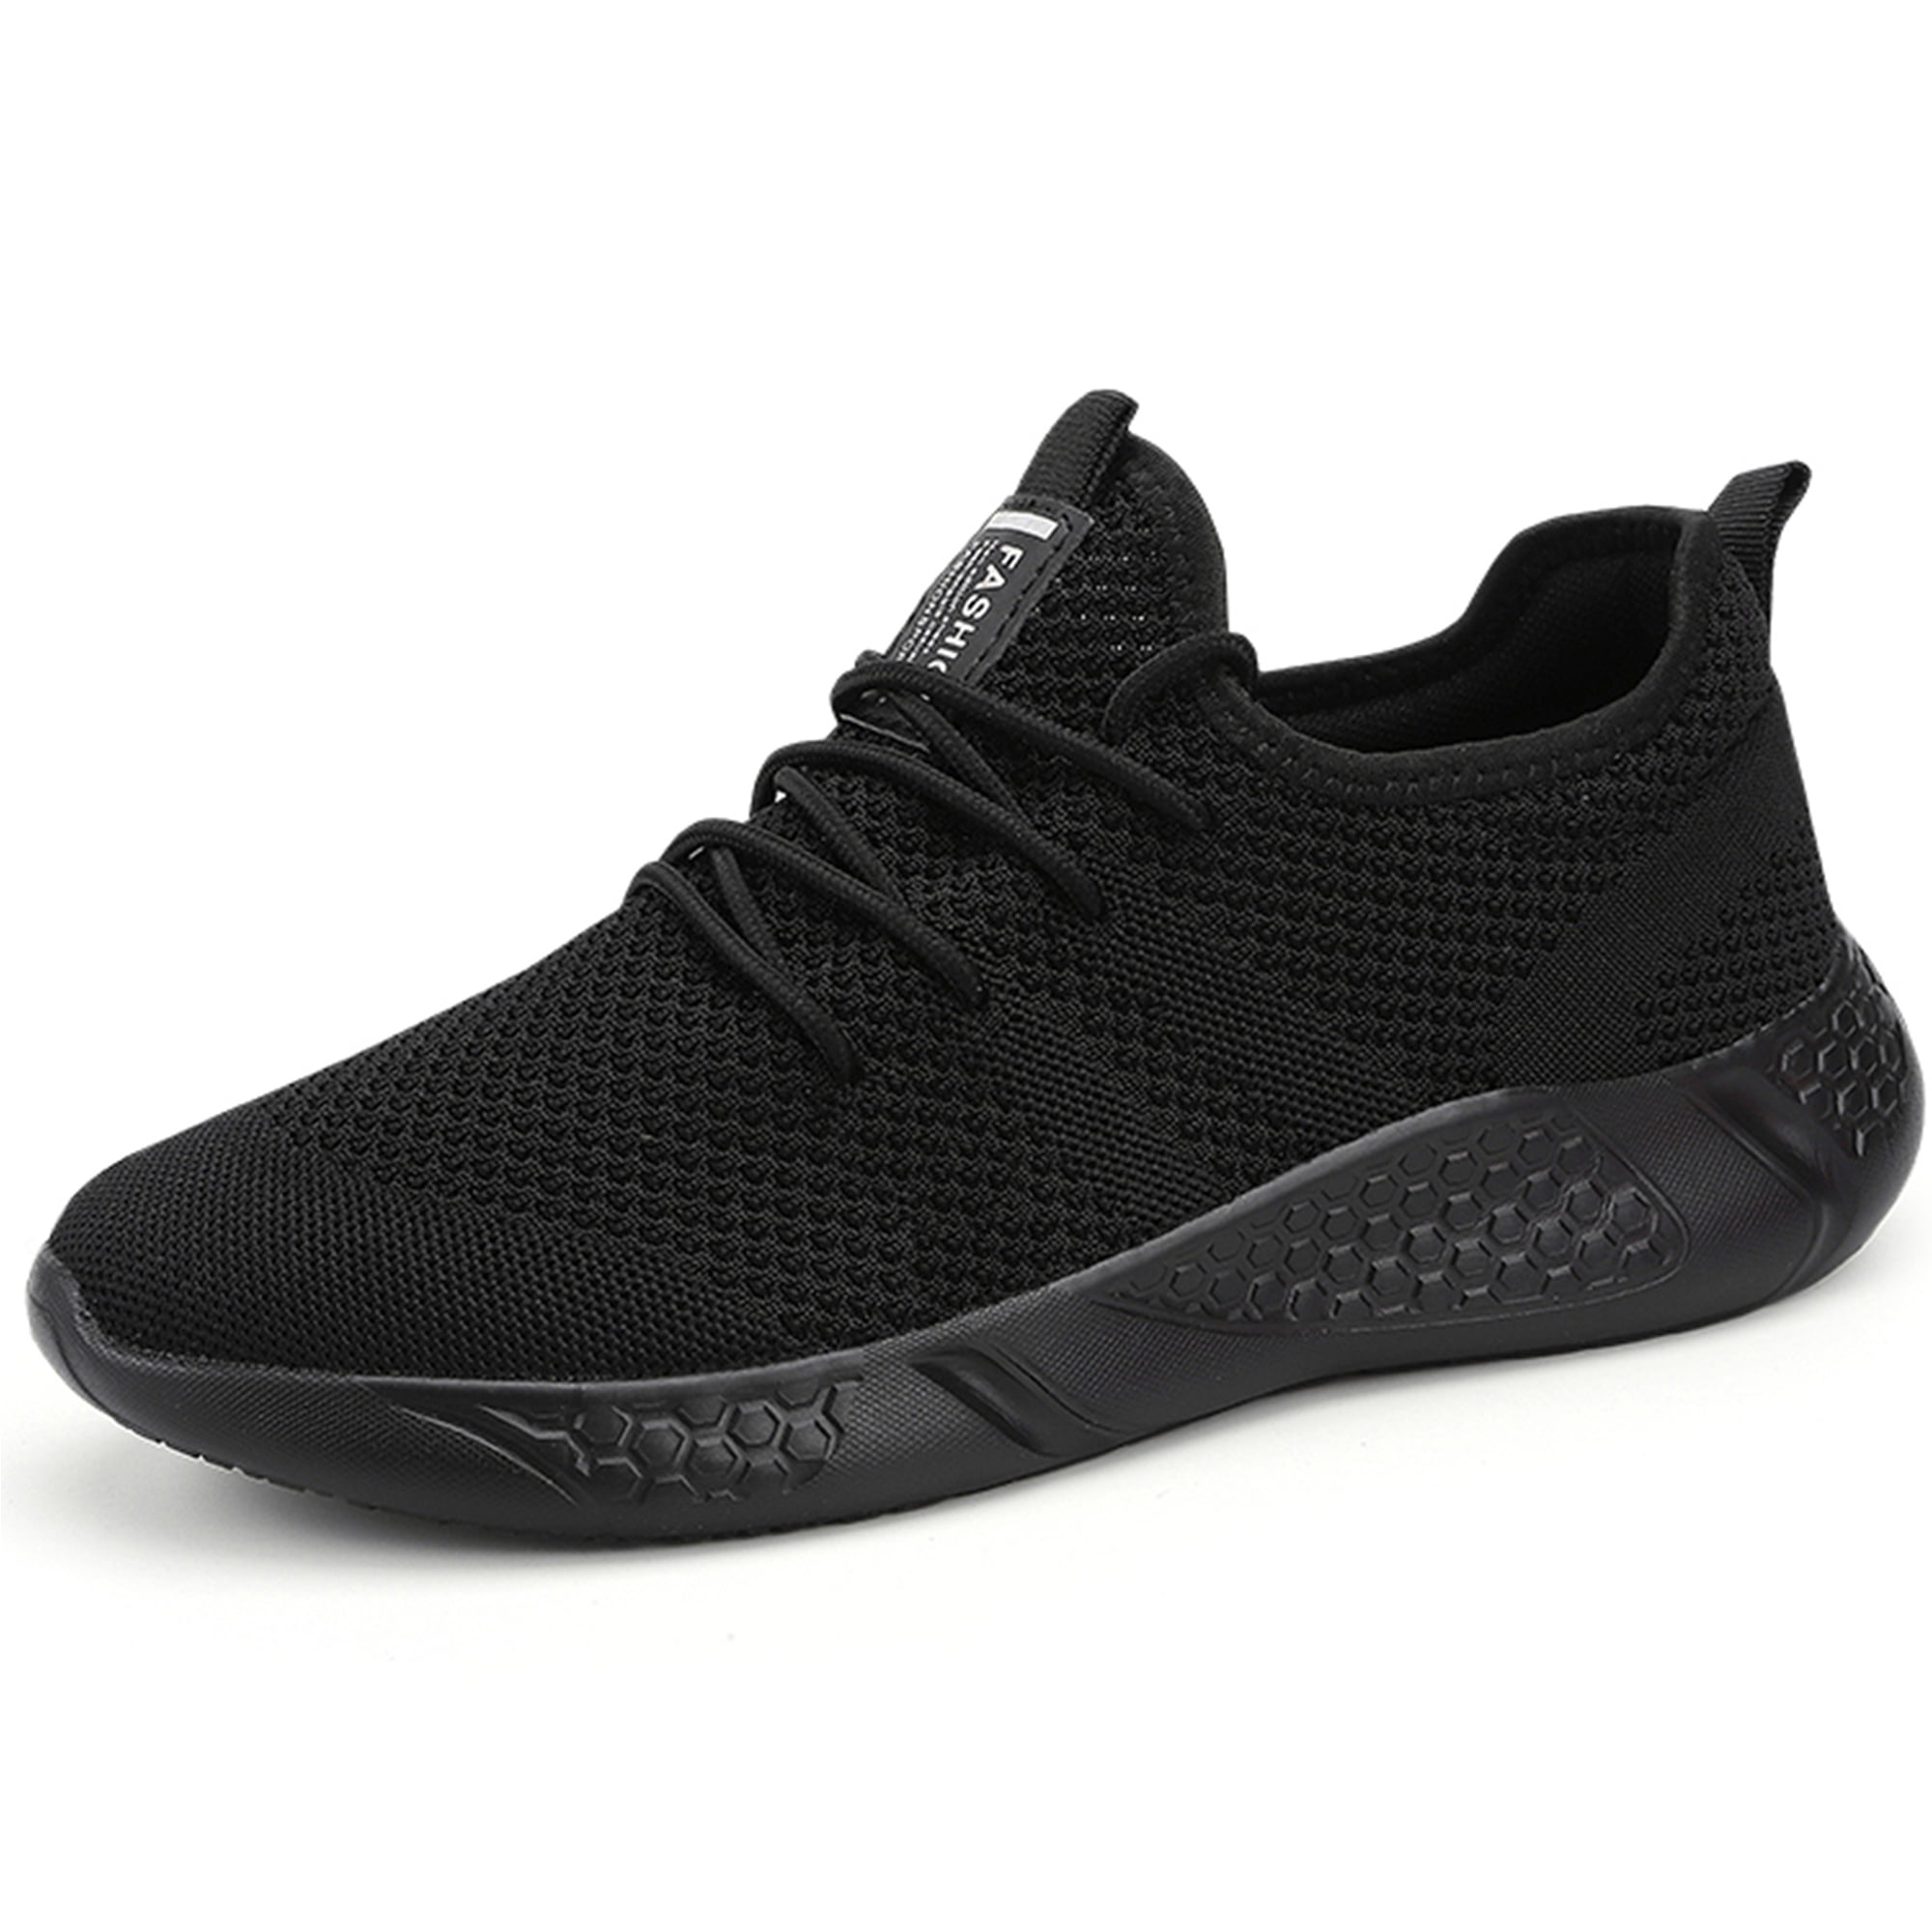 BUBUDENG Mens Mesh Sneakers Lightweight Casual Shoes Athletic Shoes ...